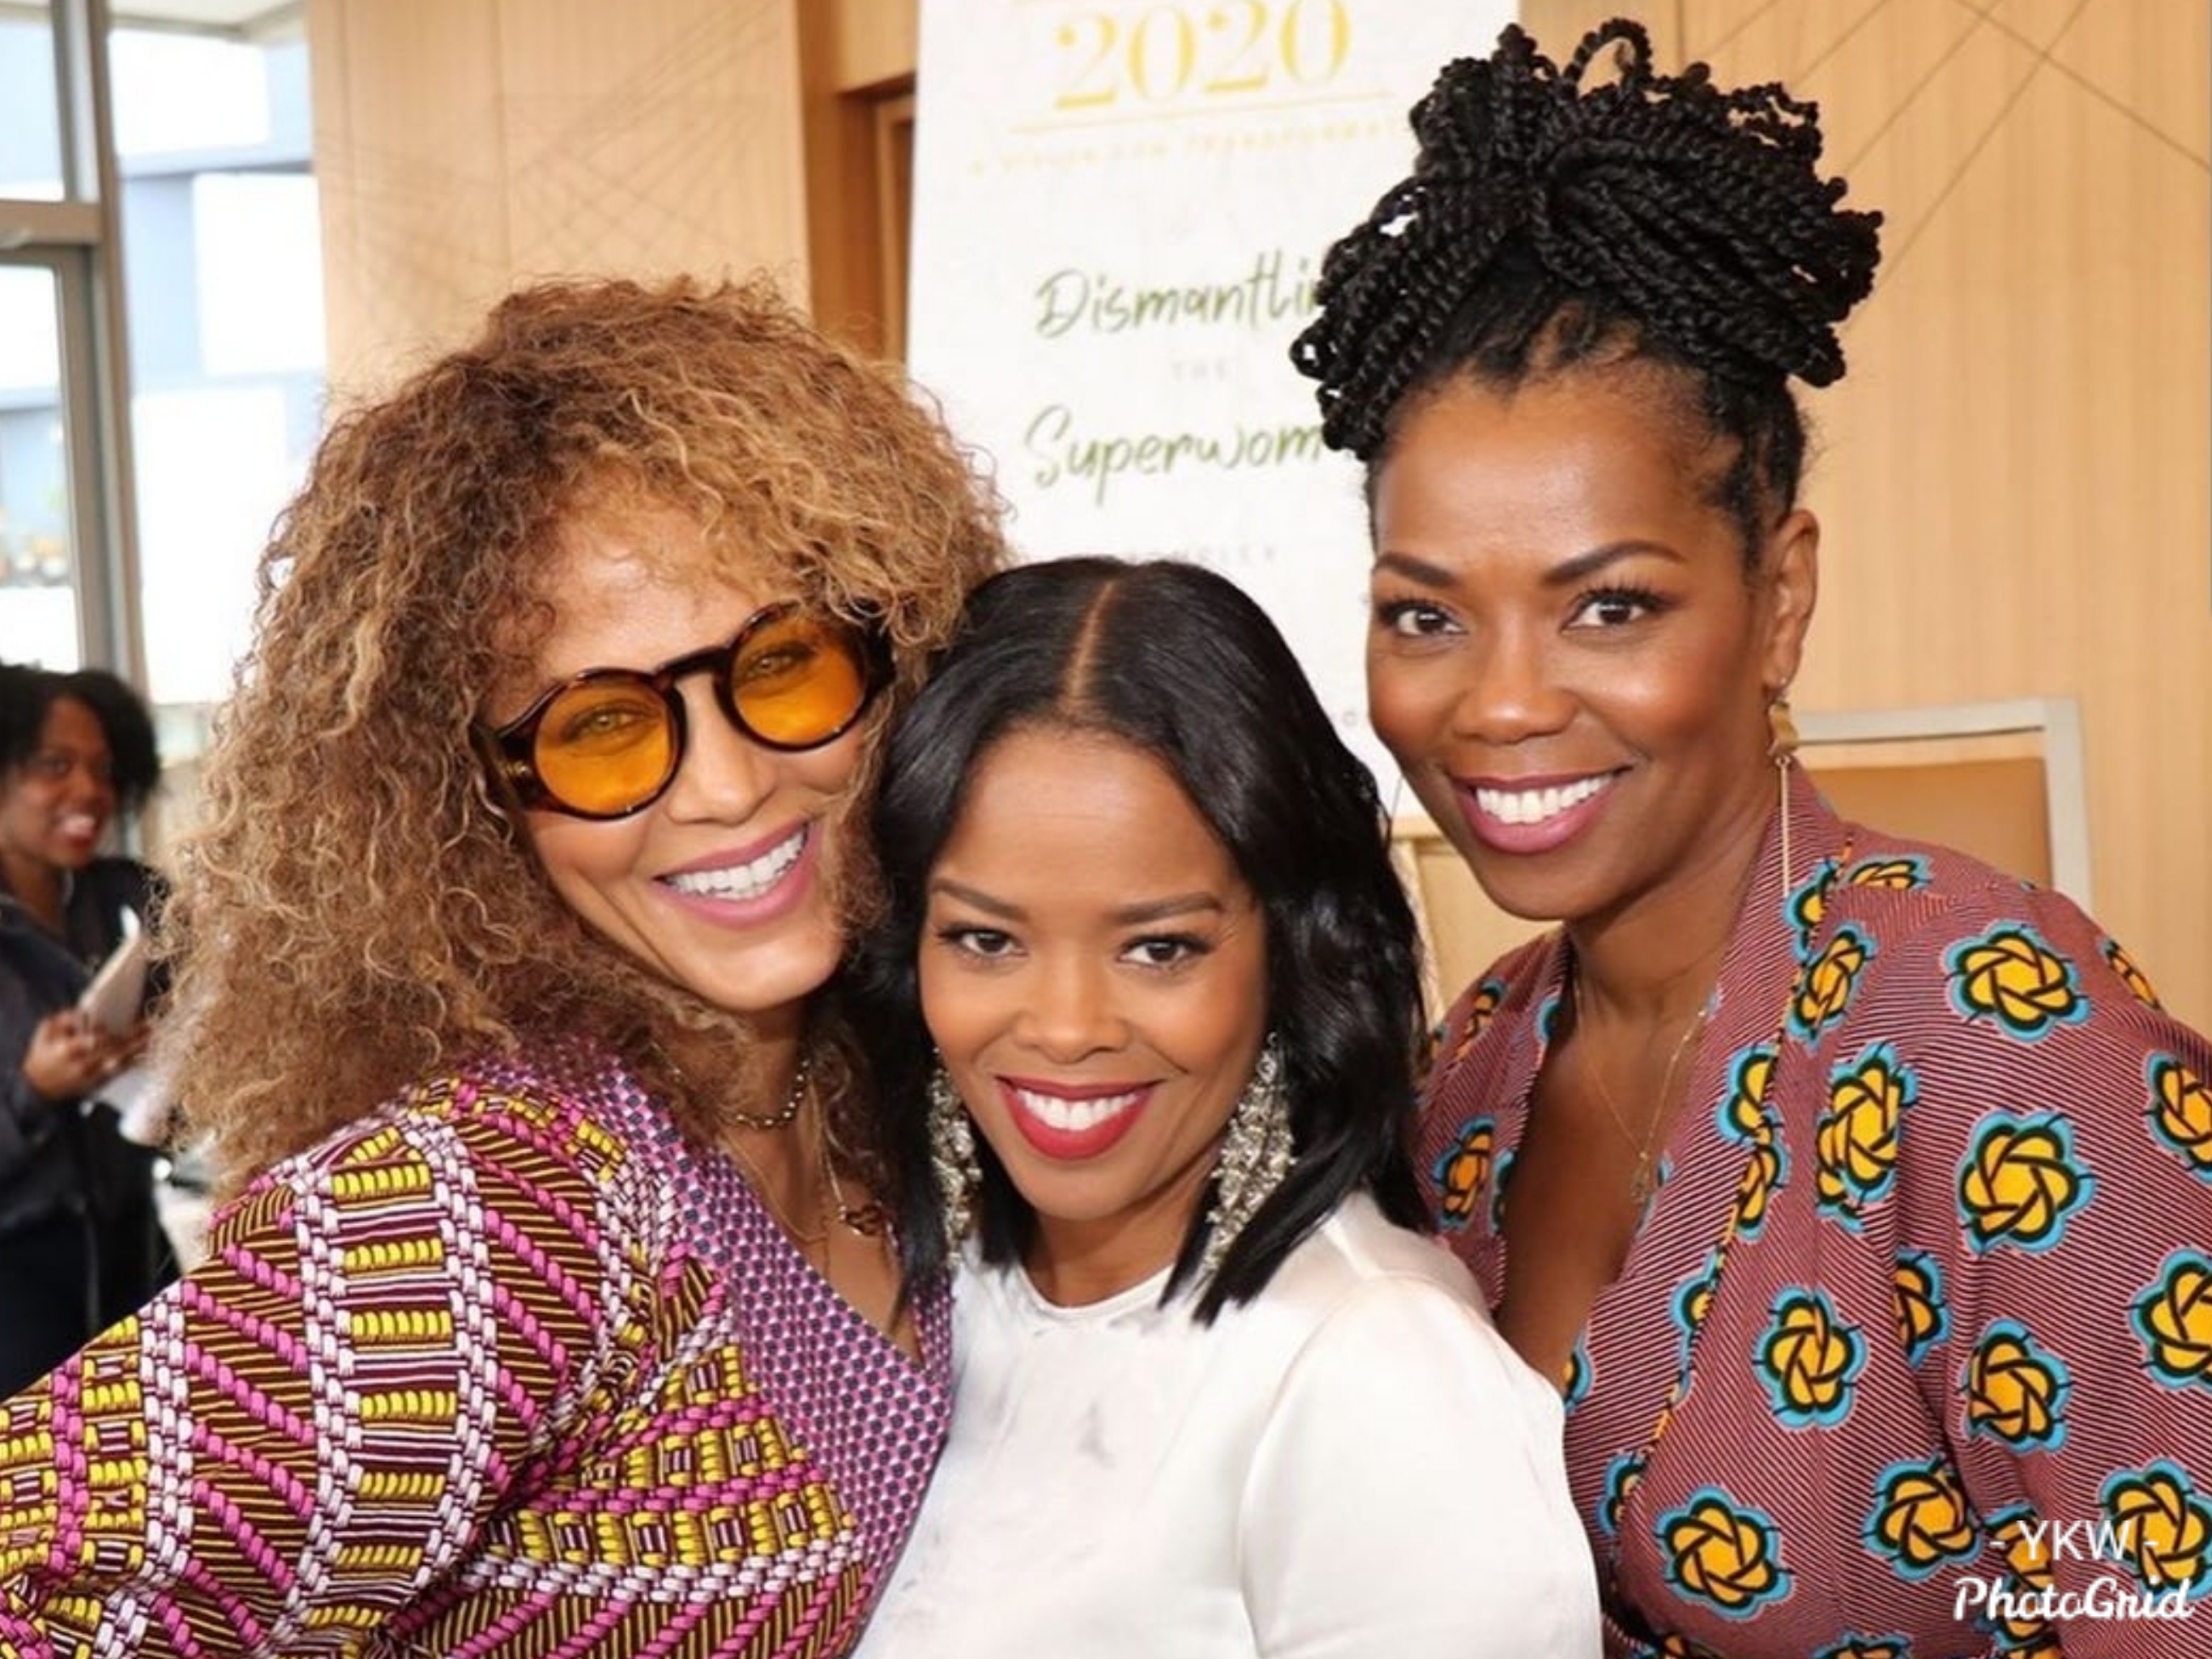 “Soul Food” Sisters Support Malinda Williams At Women’s Empowerment Event